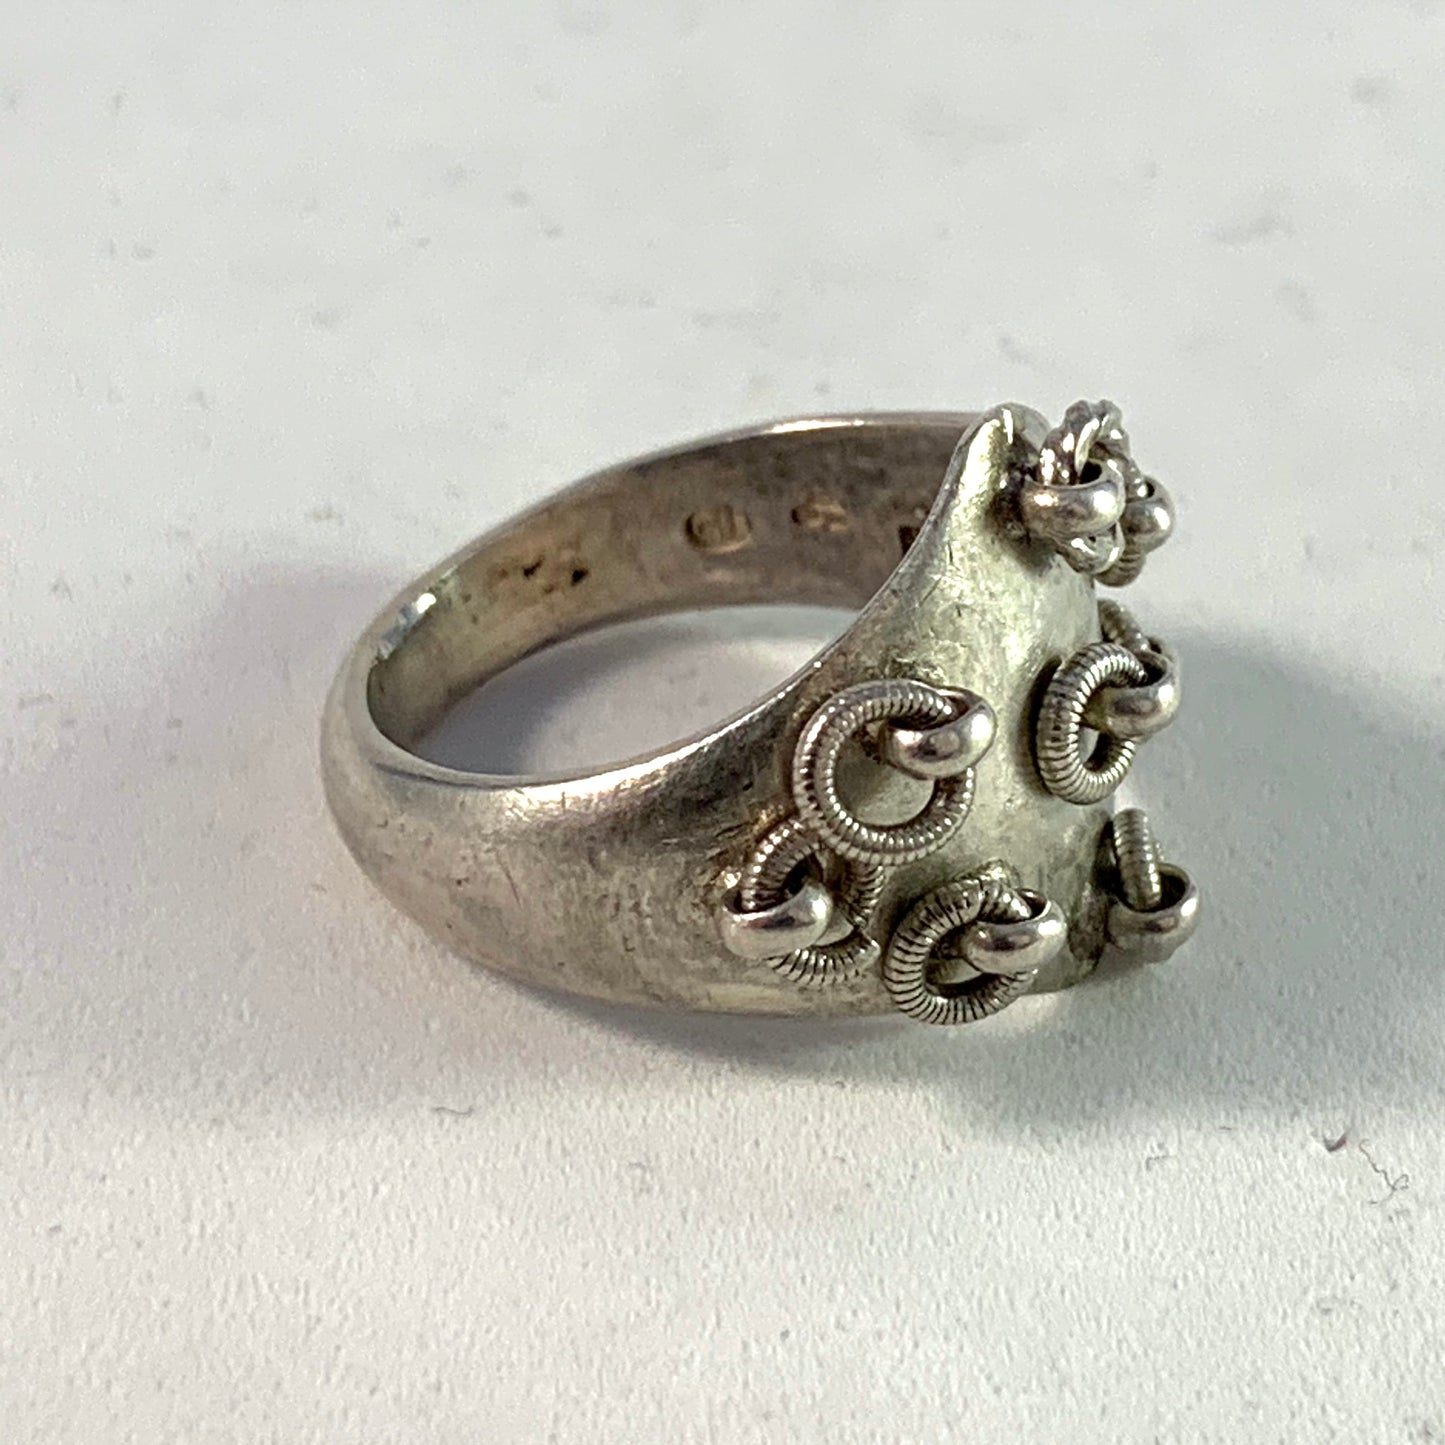 Piteå, Sweden early 1900s, Solid Silver Traditional Sami Ring.